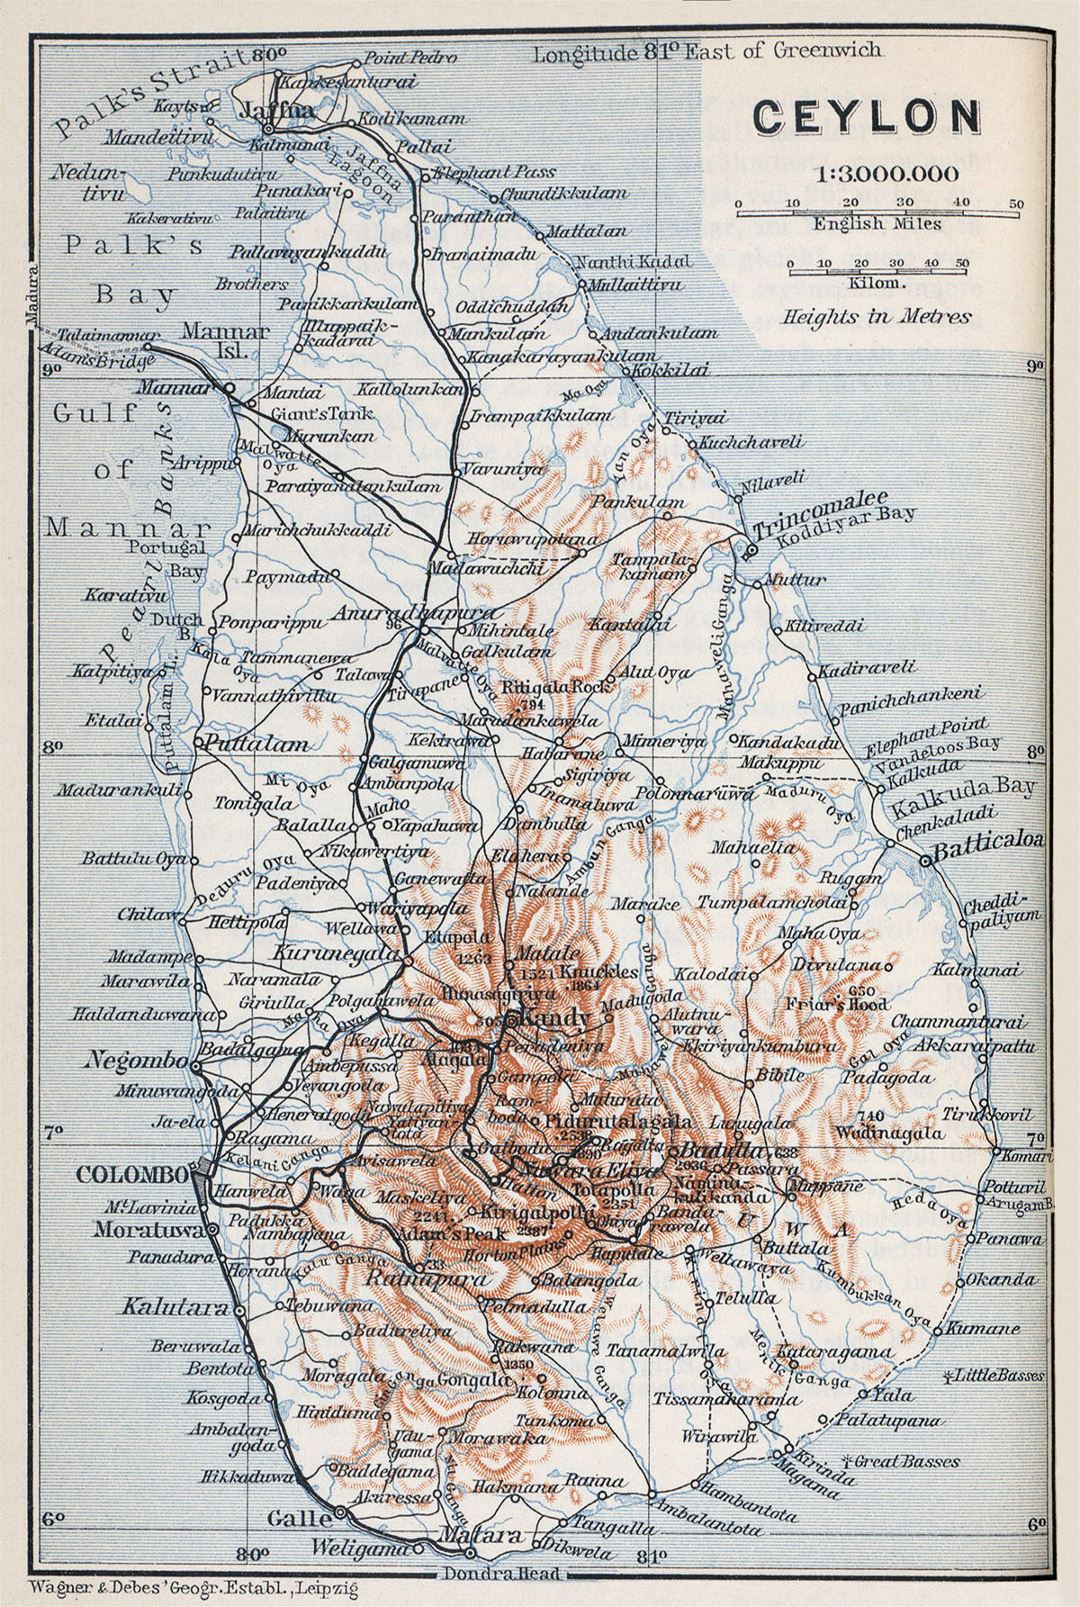 Large old map of Sri Lanka with roads, cities and relief - 1914